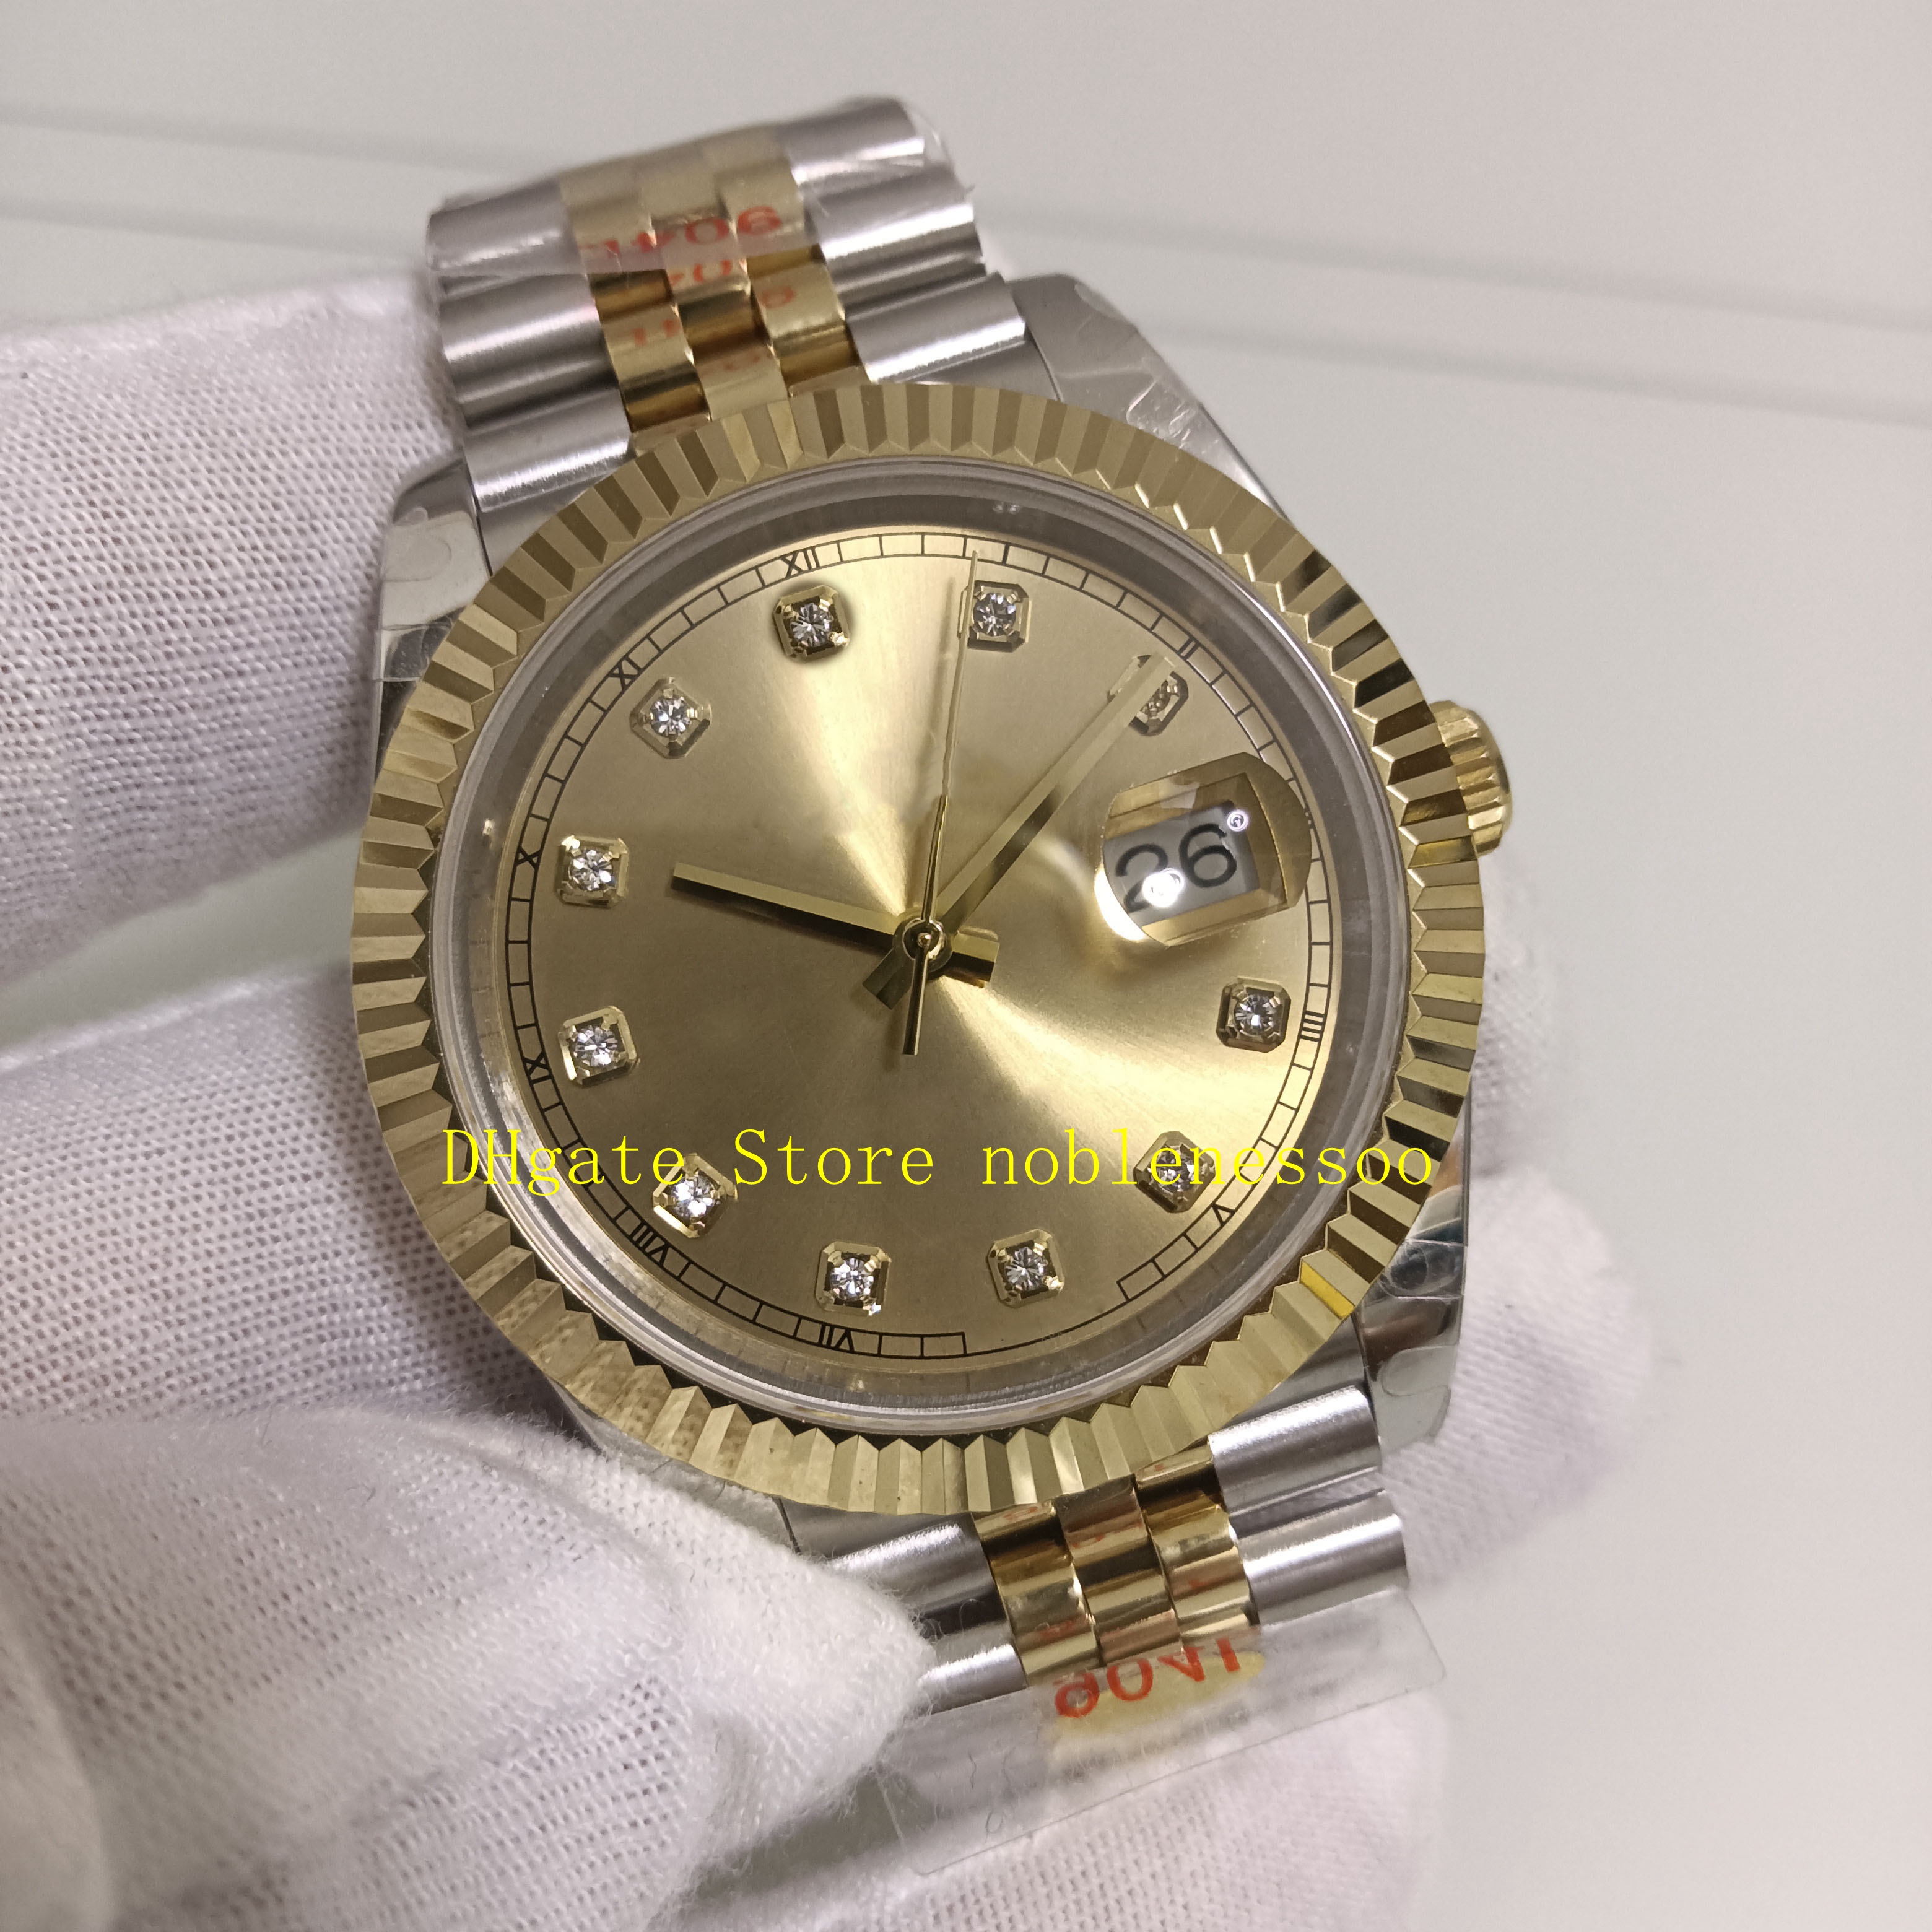 20 Style Real Po 904L Steel Watch Men 41mm Champagne Diamond Dial 18k Yellow Gold Fluted Bezel Sapphire Glass V12 Version Cal 32728